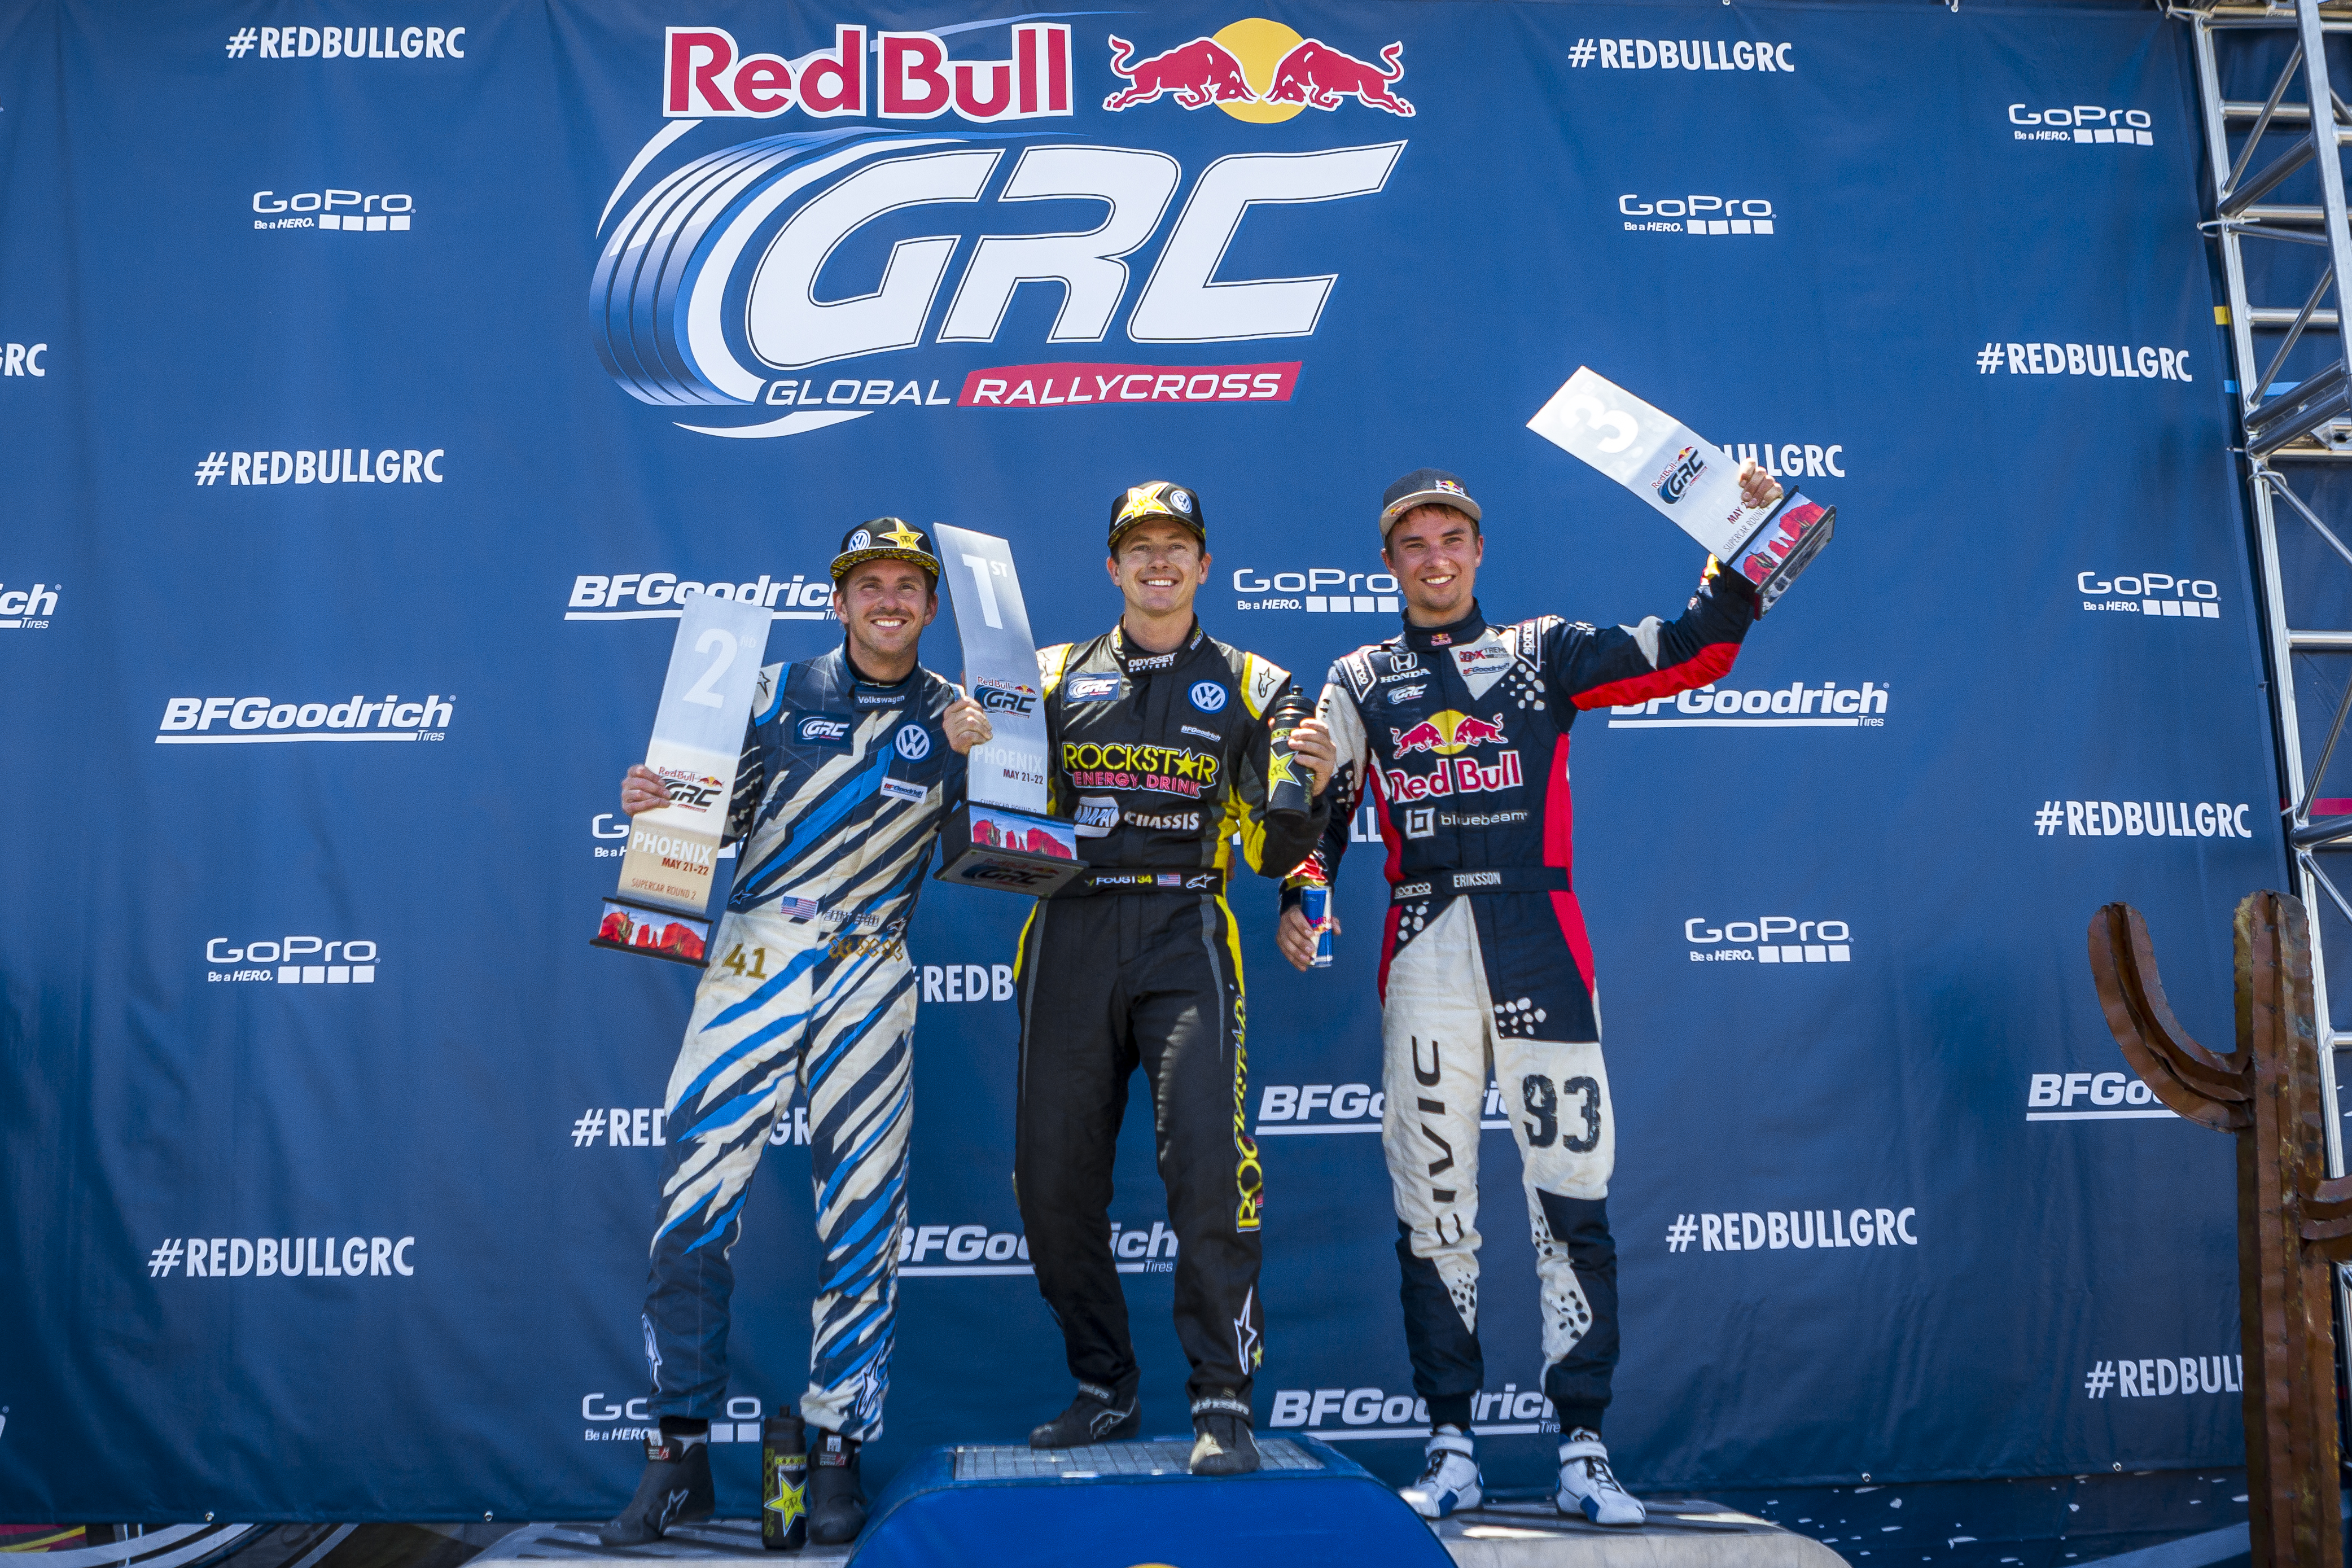 (L-R) Scott Speed, Tanner Faust, and Sebastian Eriksson celebrate on the podium at Round 2 of Red Bull Global Rallycross at Wild Horse Pass Motorsports Park in Phoenix, Arizona, USA on March 22, 2016